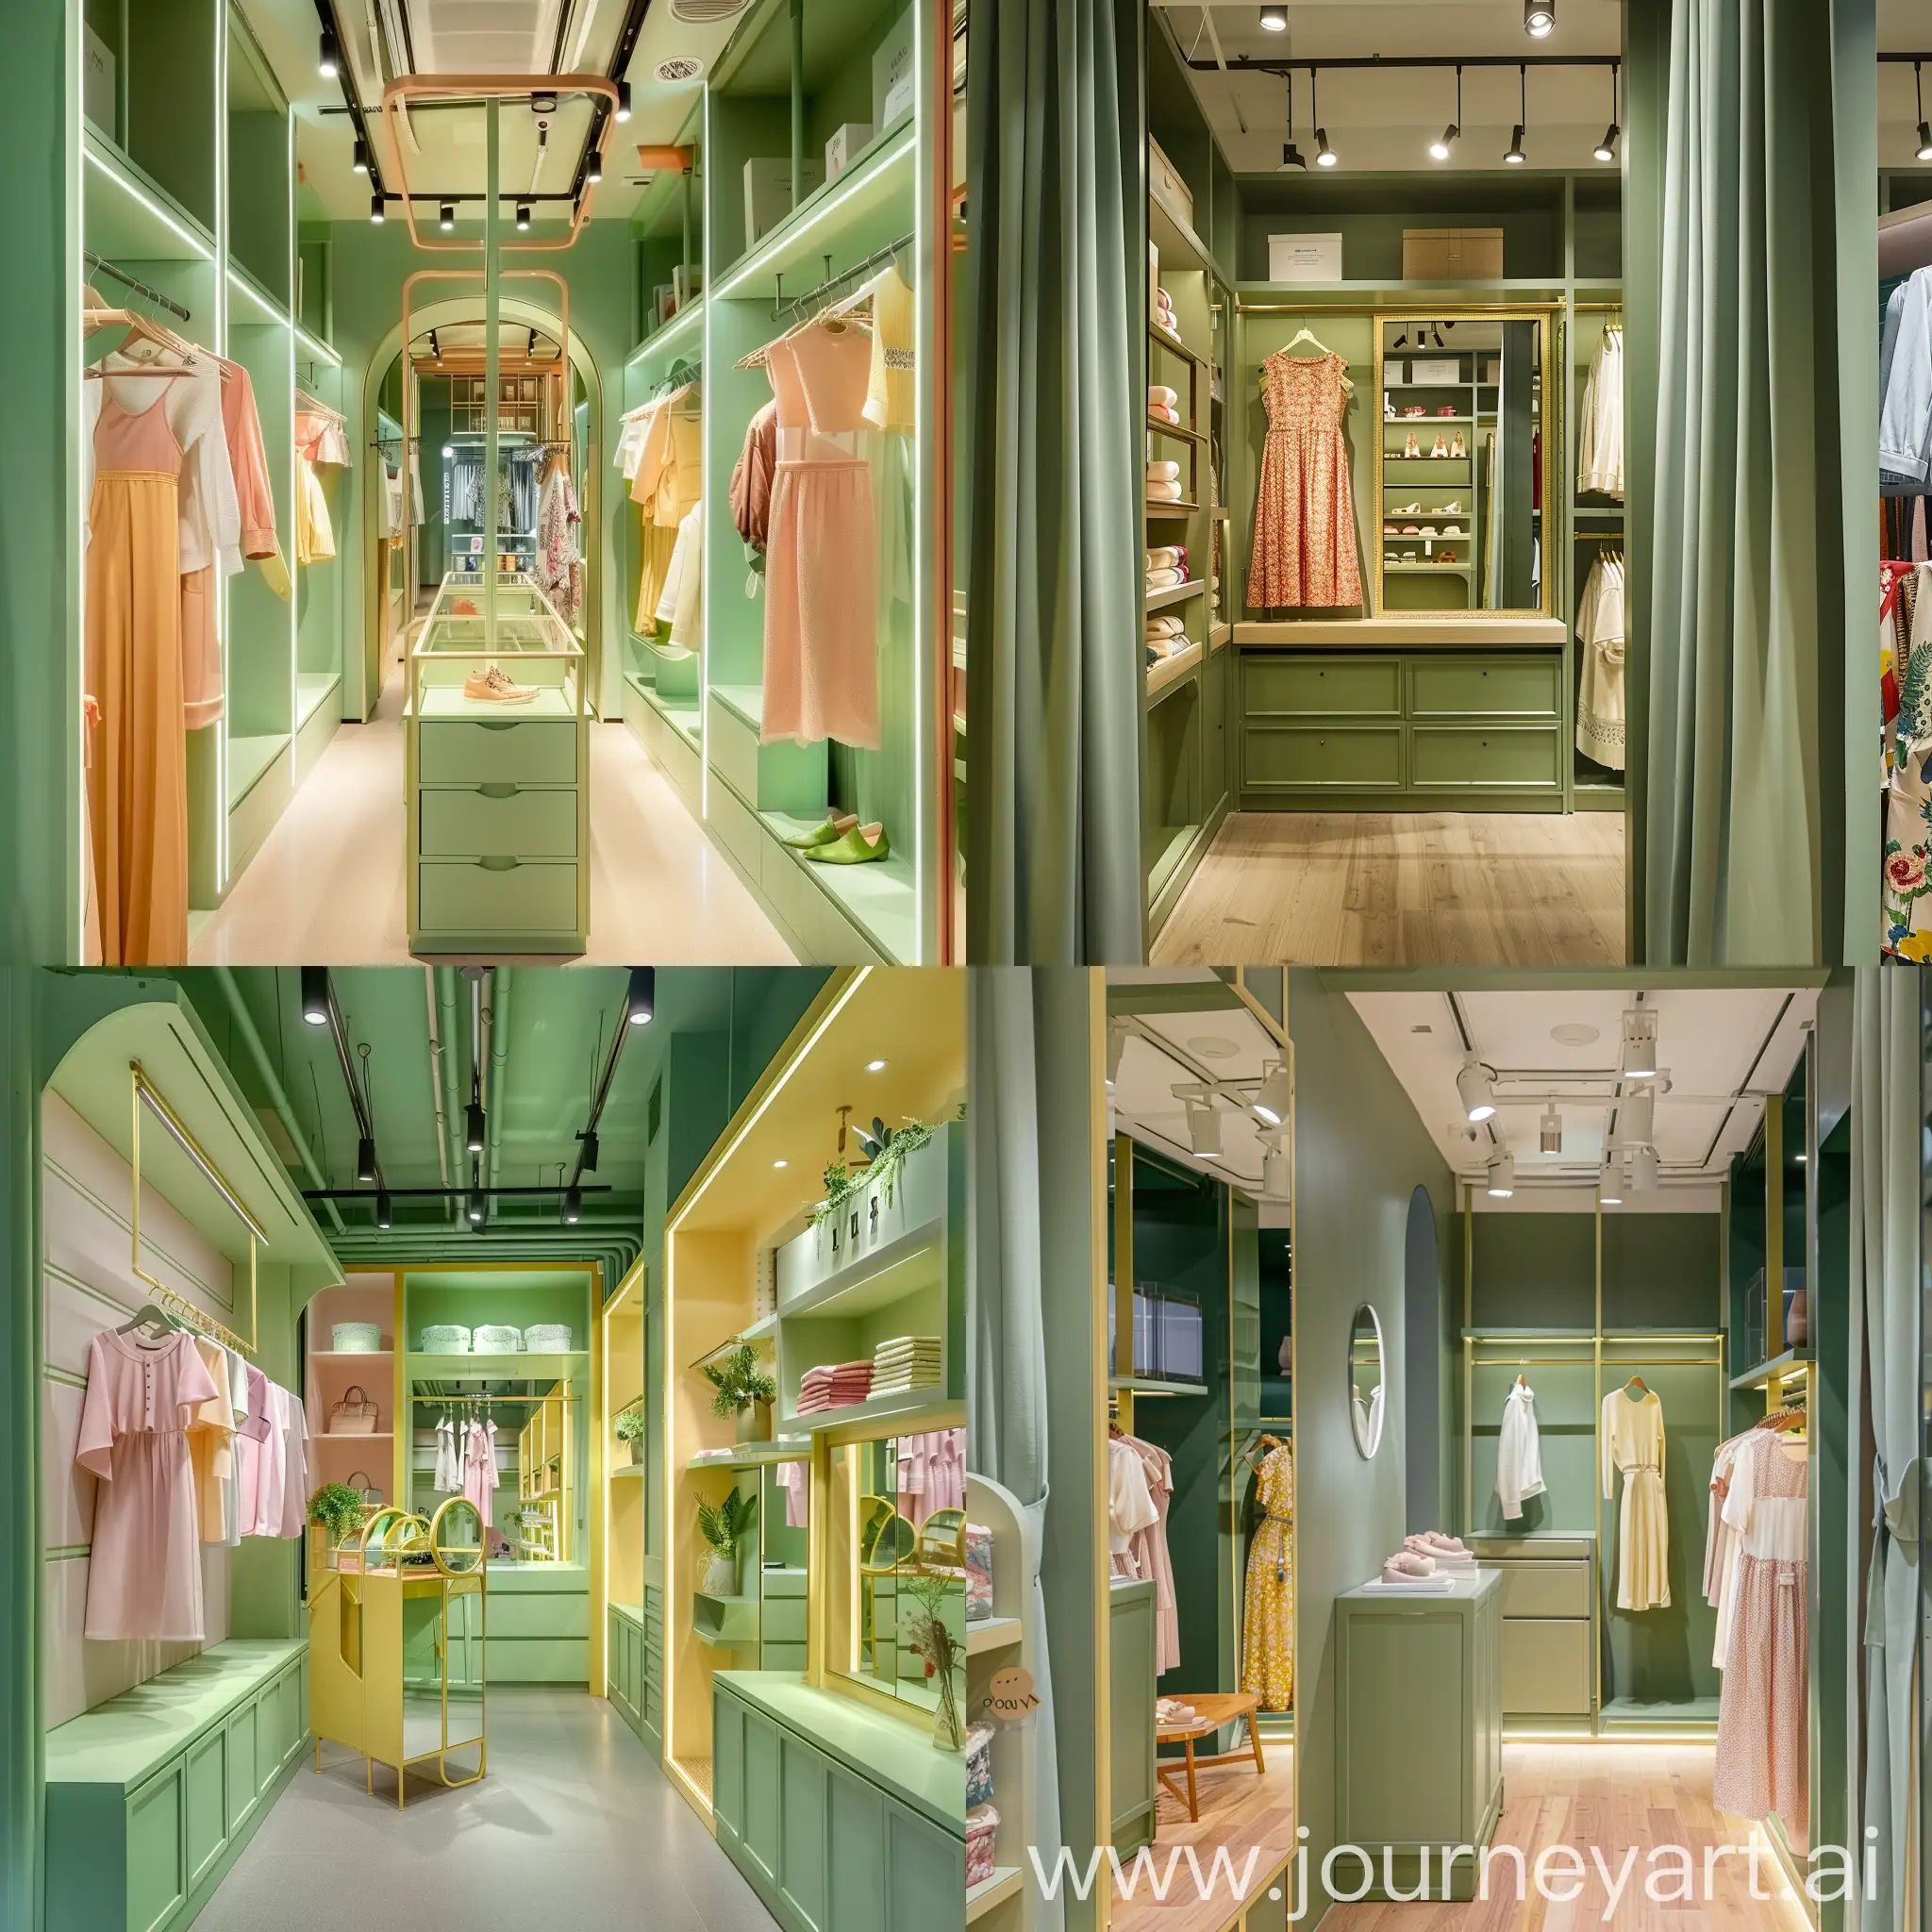 Boutique-Island-Womens-Clothing-Retail-Setting-with-Fitting-Room-and-Green-Accents